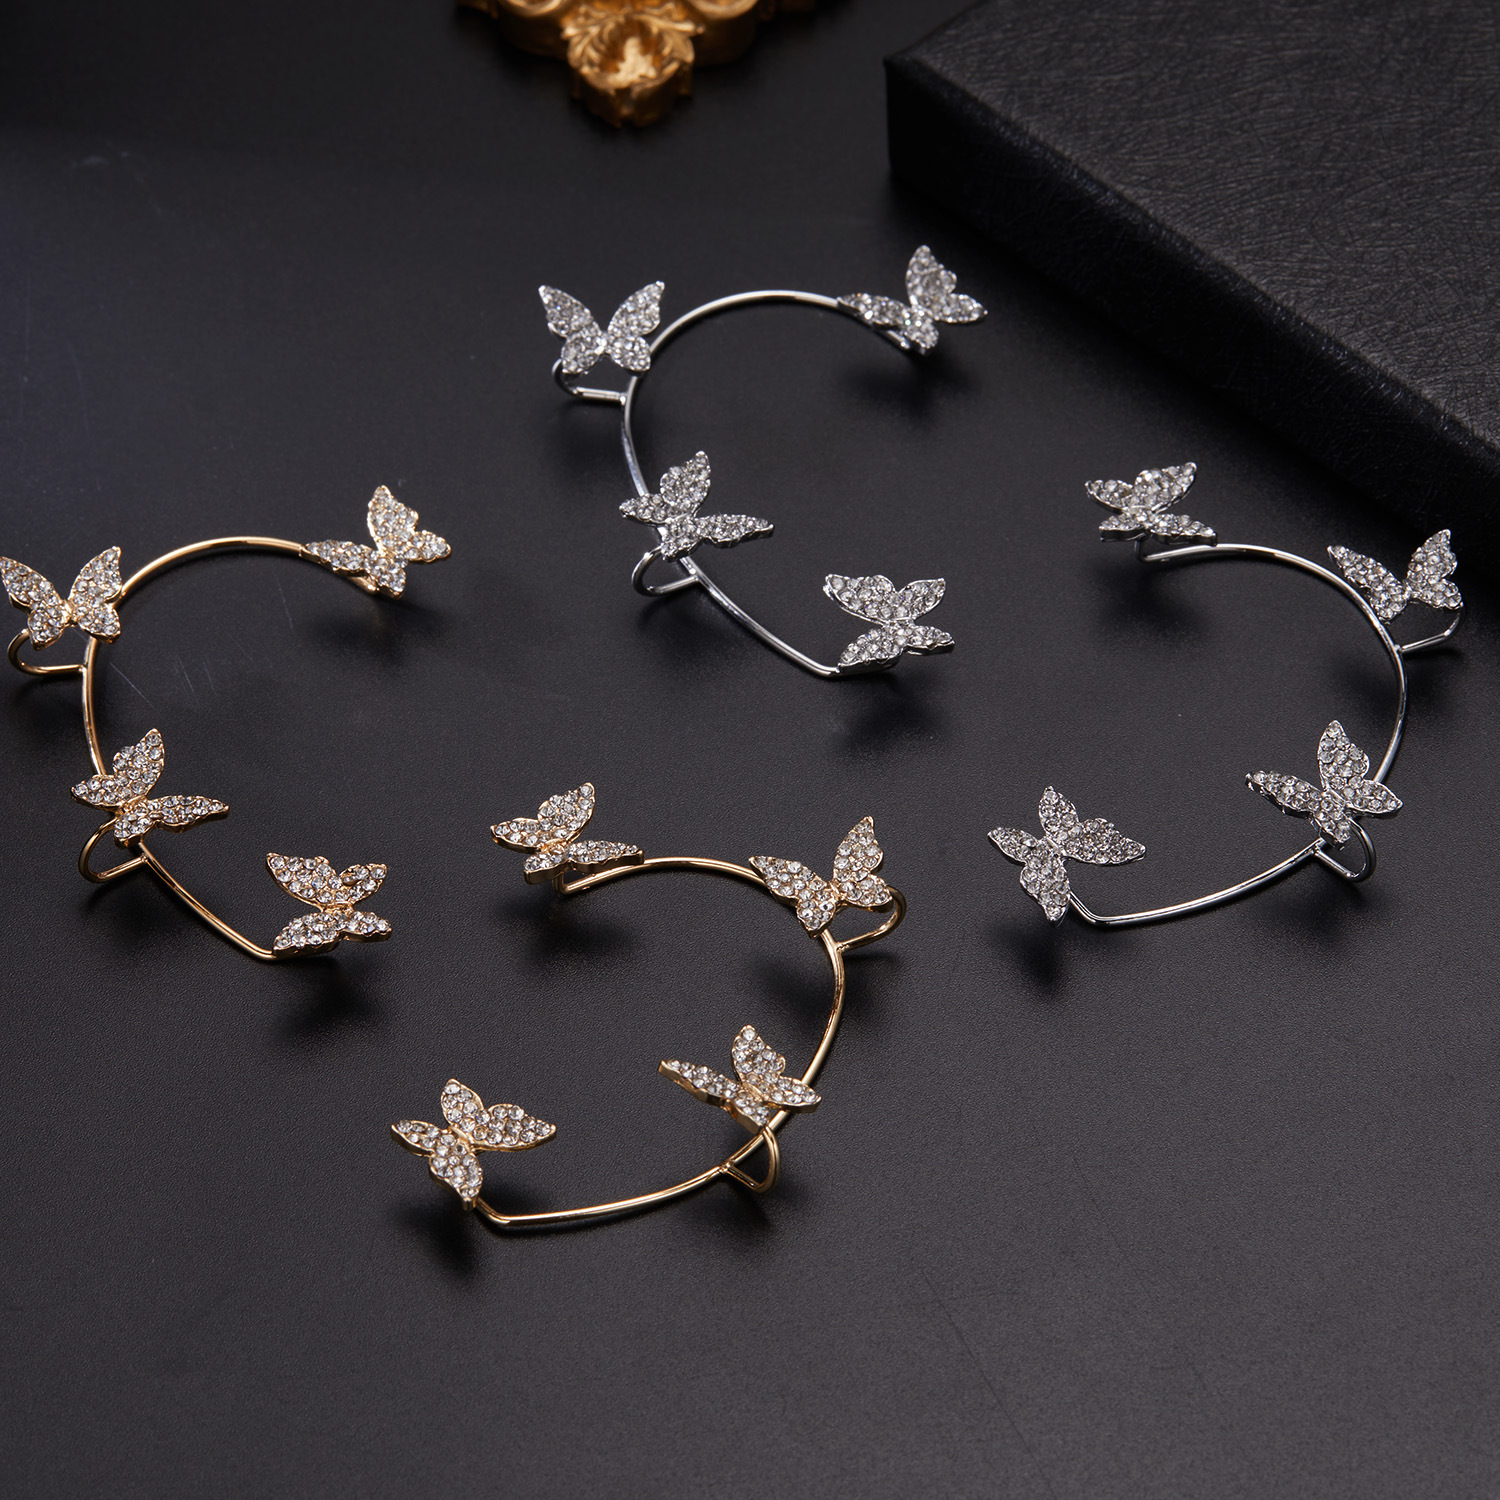 South Korea's Dongdaemun Super Flash Butterfly Ear Clips And Ear Hooks All-in-One Earrings Fairy Spirit High-quality Versatile Earrings Without Ear Holes